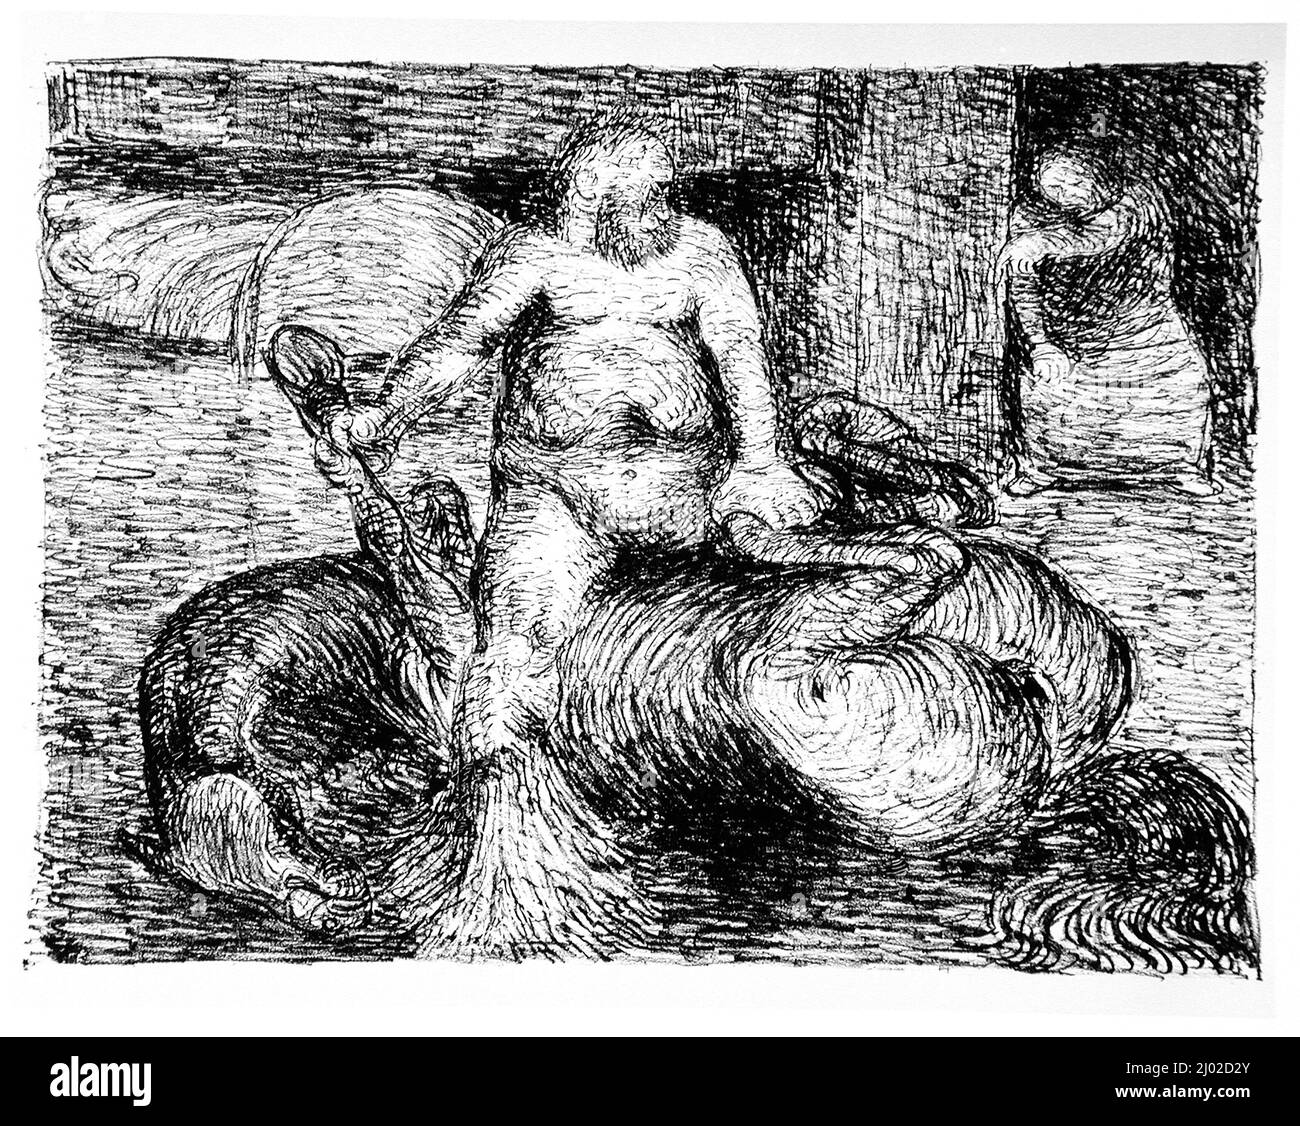 Broomleg astride the dead steed Hearthorn. Ernst Barlach (Germany, 1870-1938). Germany, 1912. Prints; lithographs. Lithograph on Van Gelder paper Stock Photo